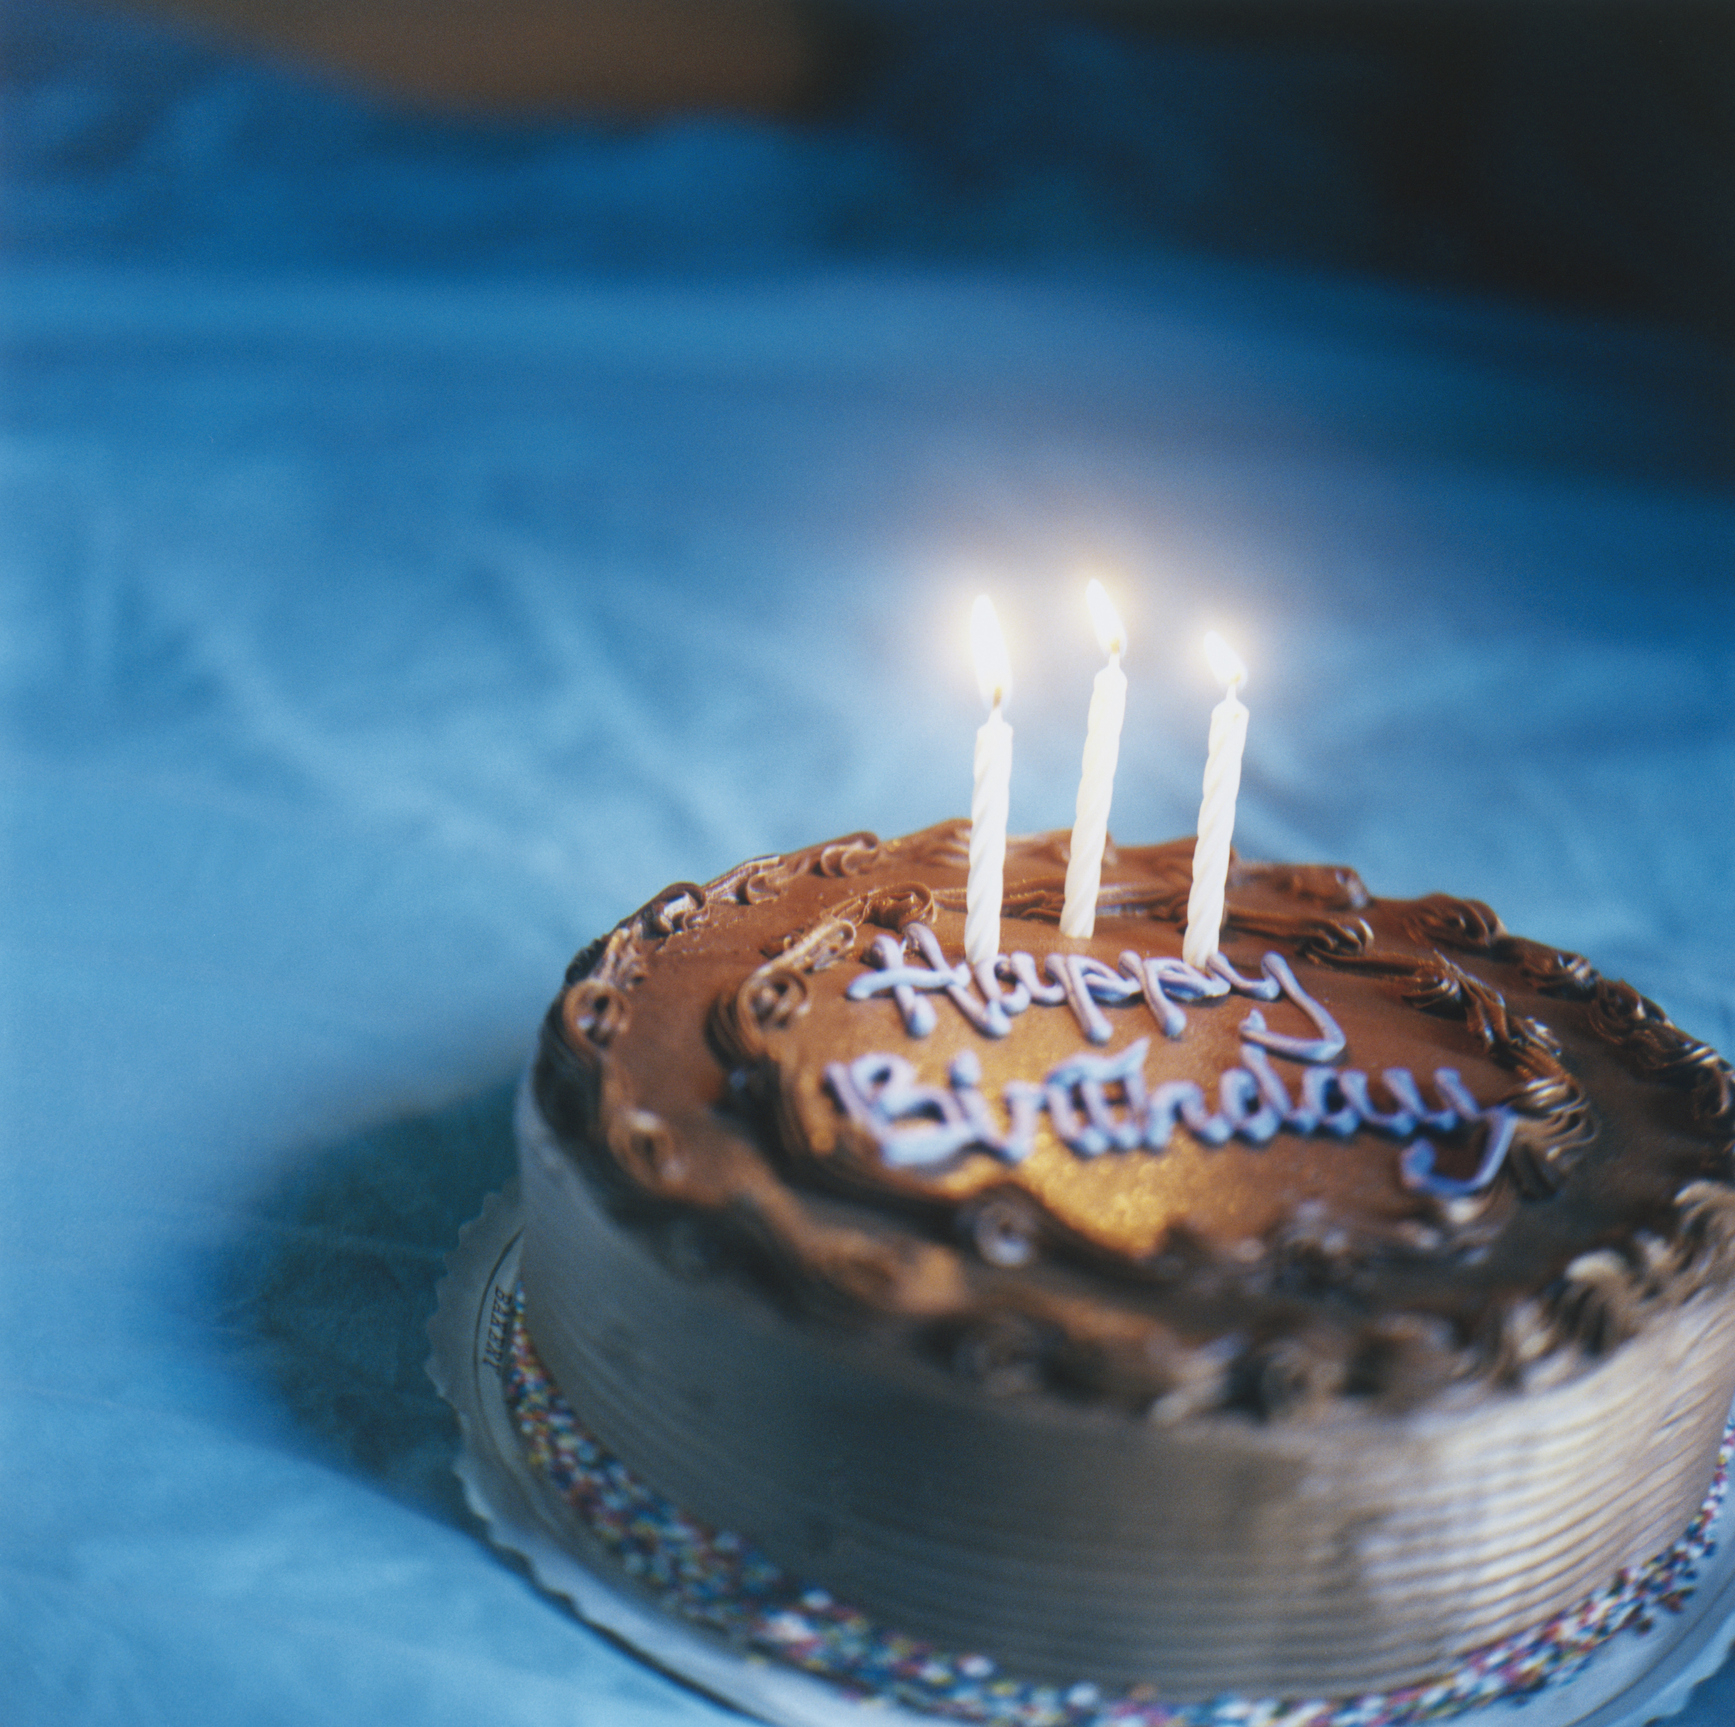 A birthday cake with lit candles and &quot;Happy Birthday&quot; icing text